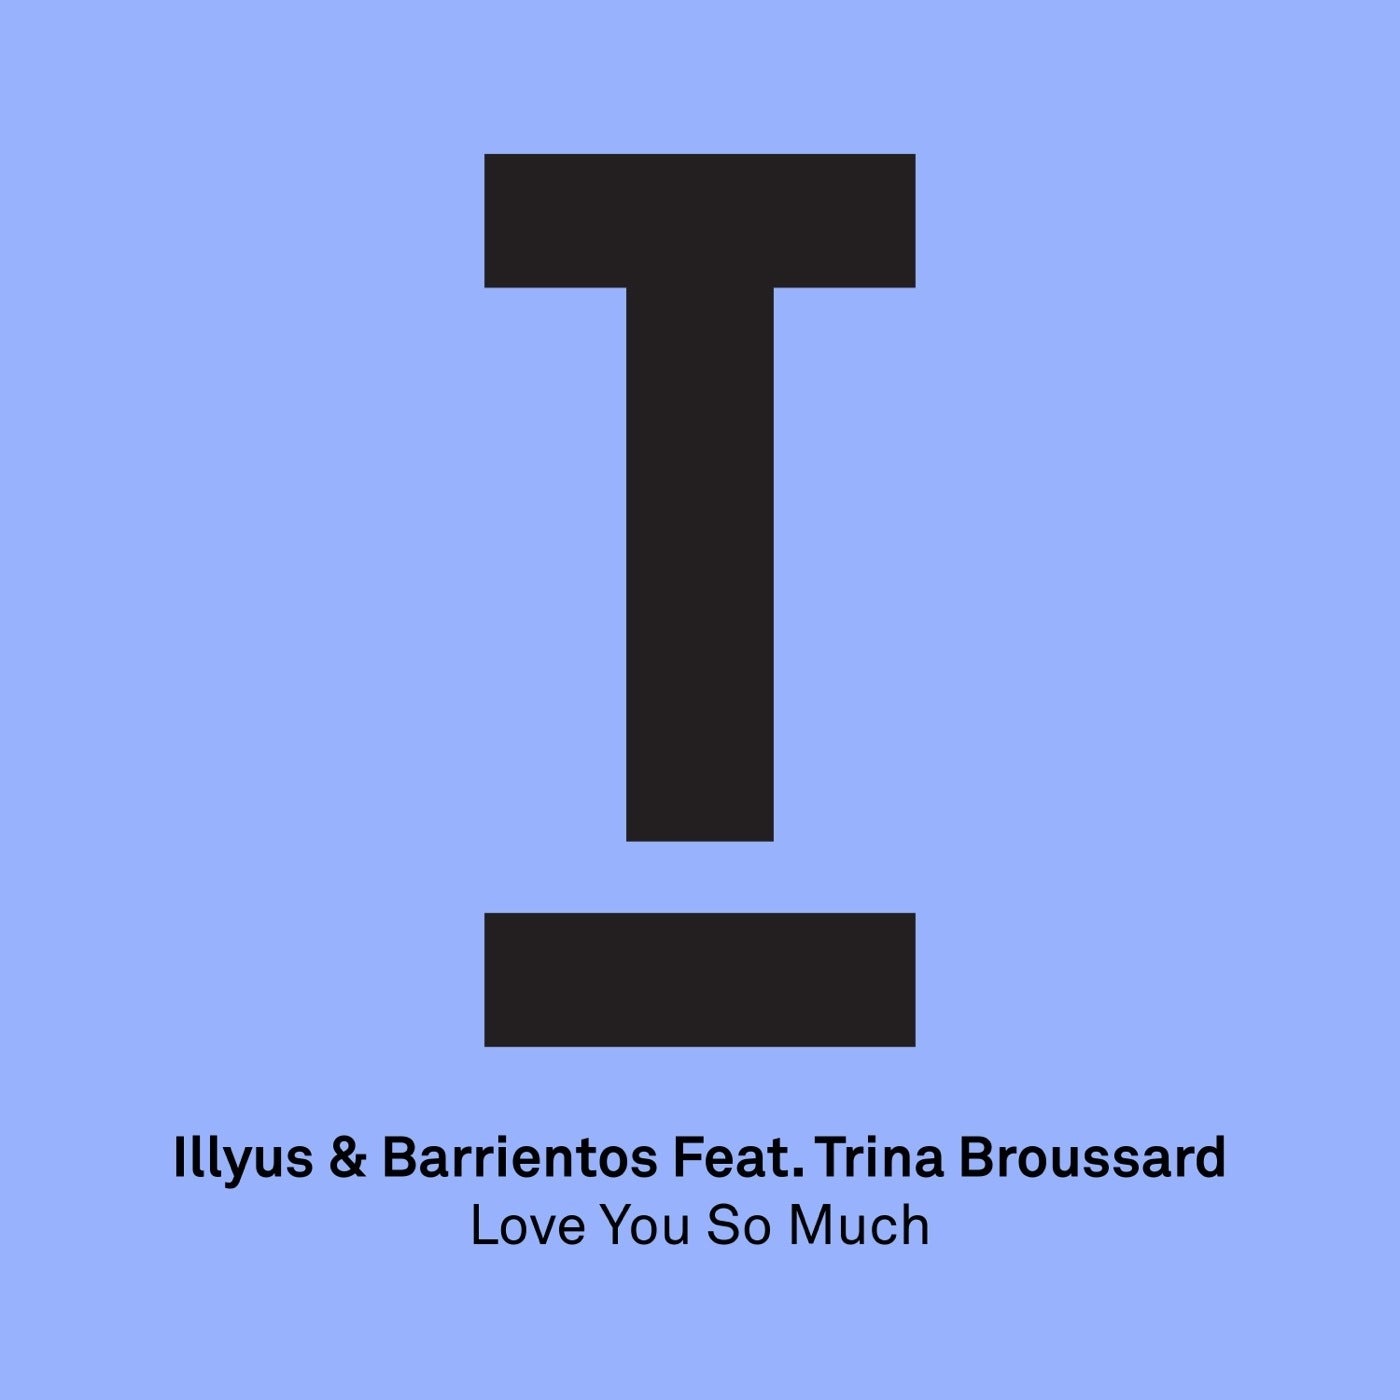 Love You So Much Feat. Trina Broussard